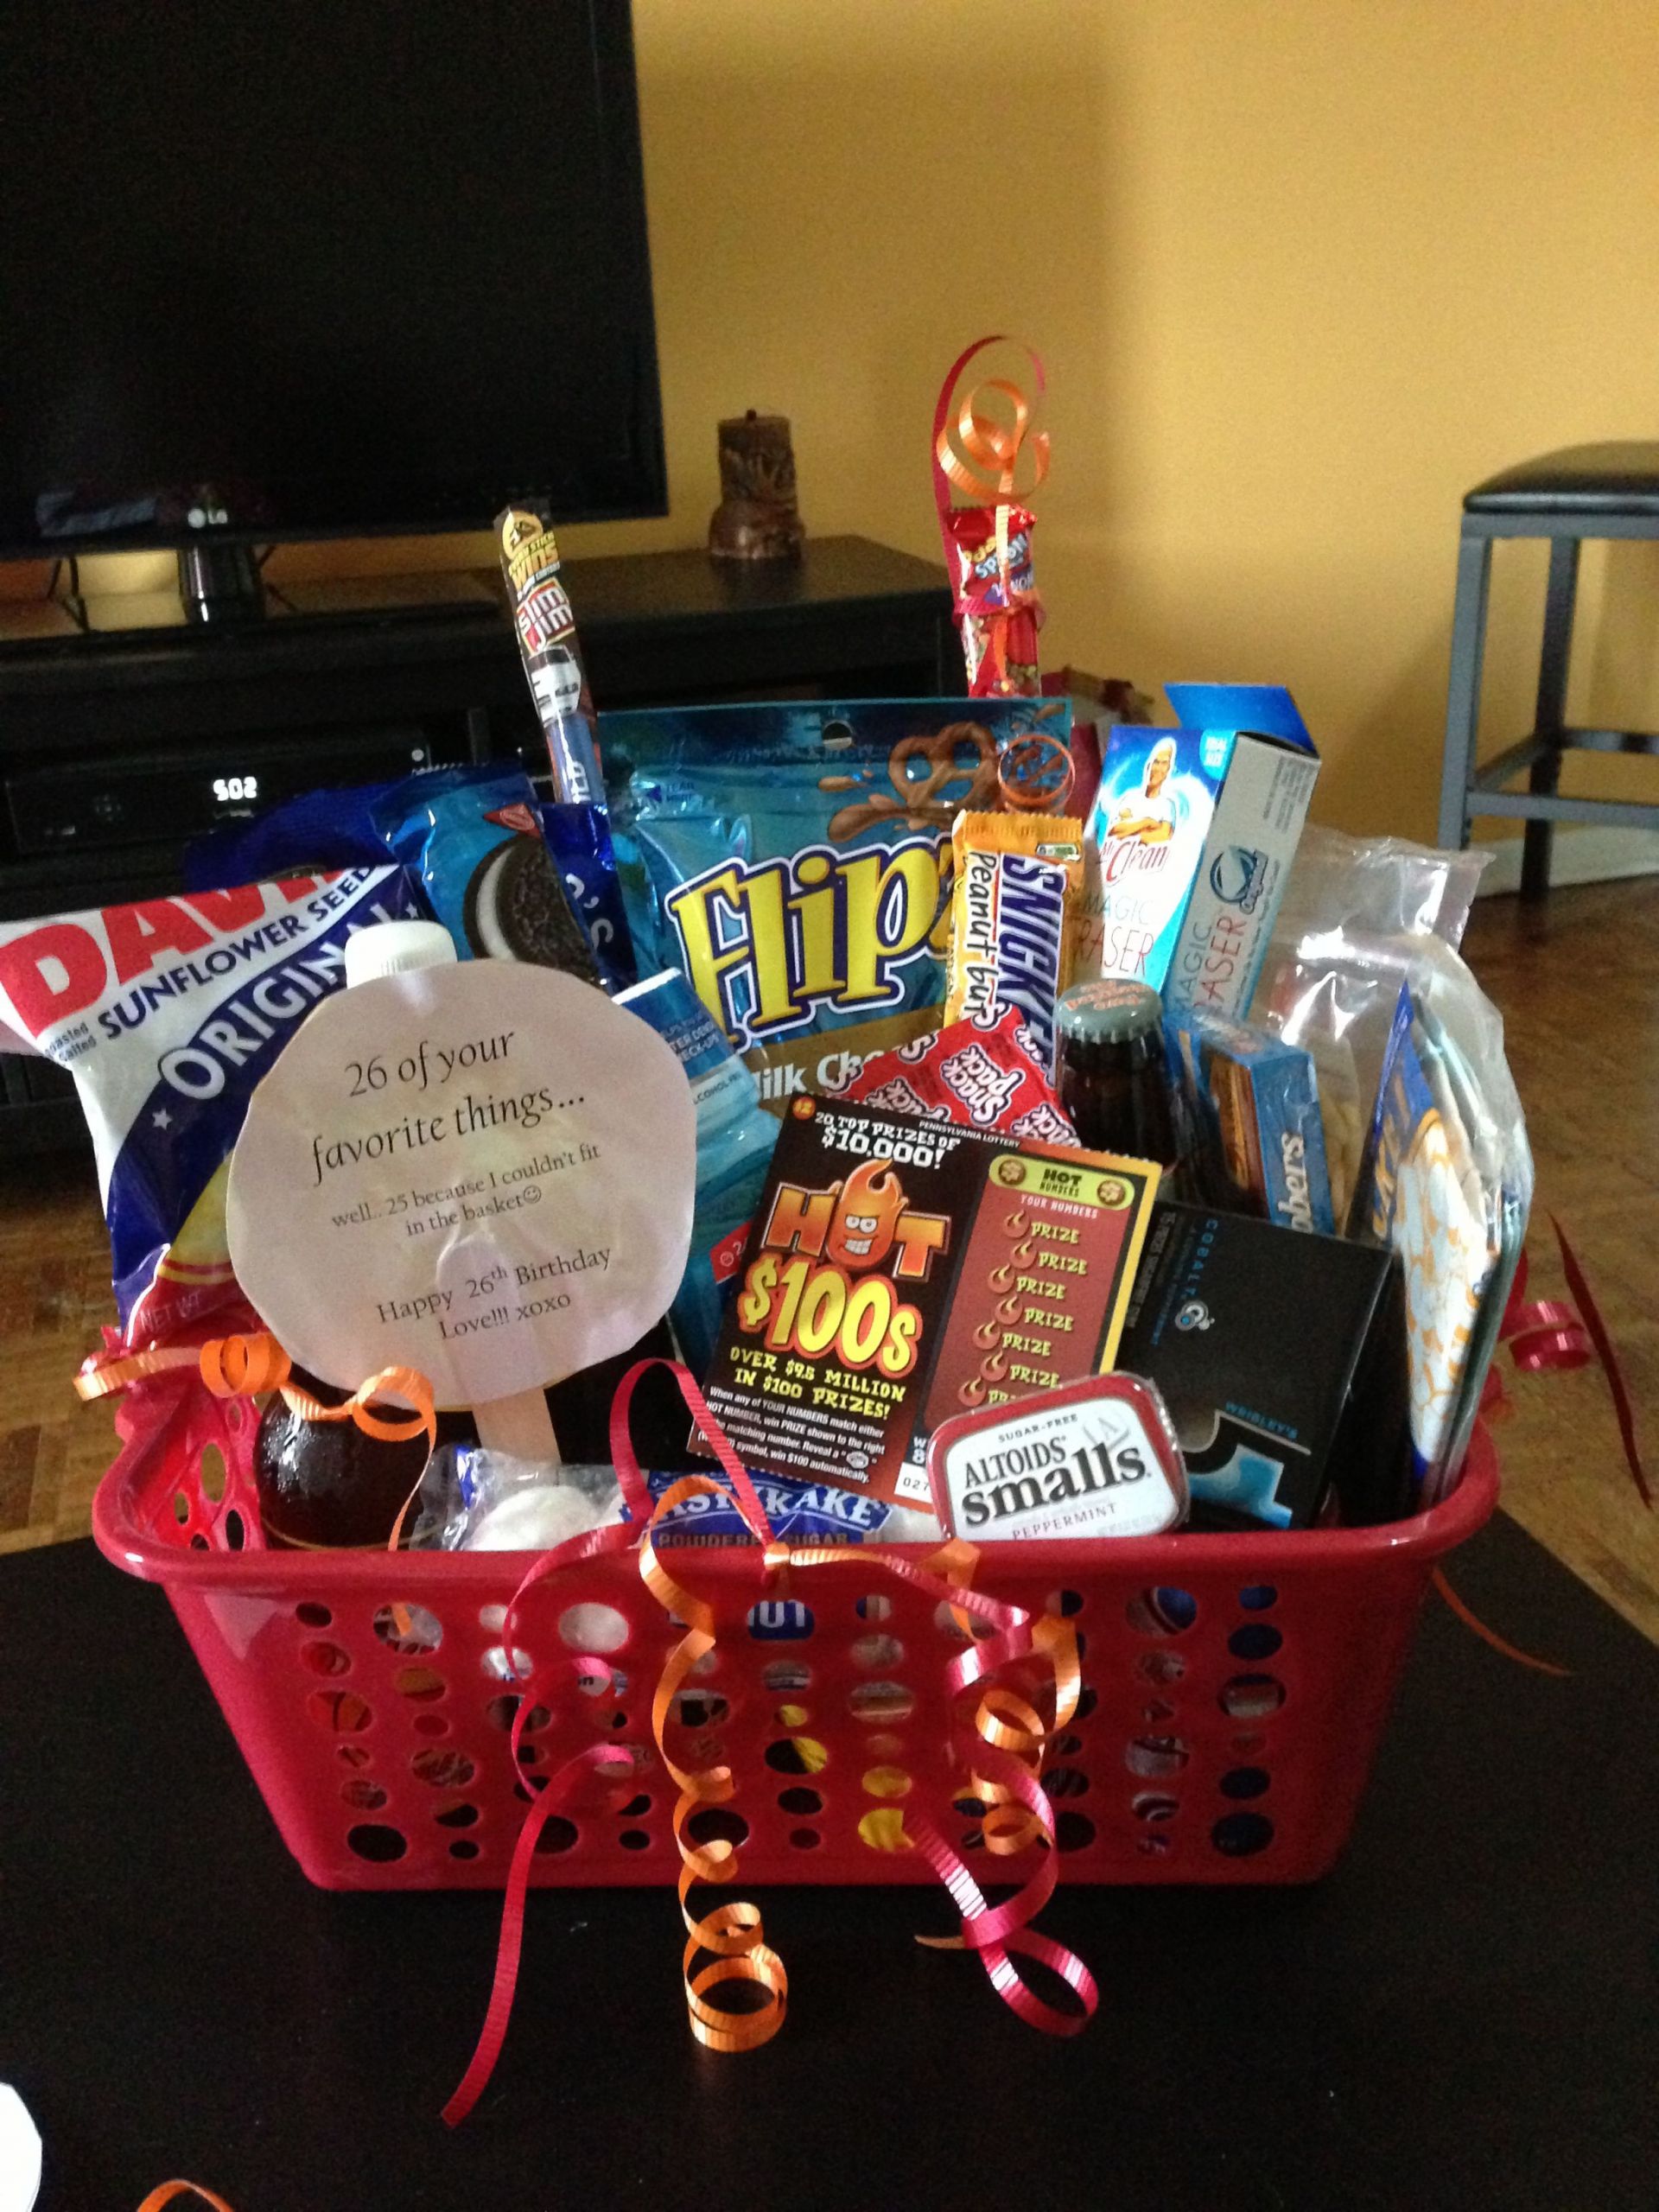 Birthday Gift Baskets For Her
 Boyfriend birthday basket 26 of his favorite things for